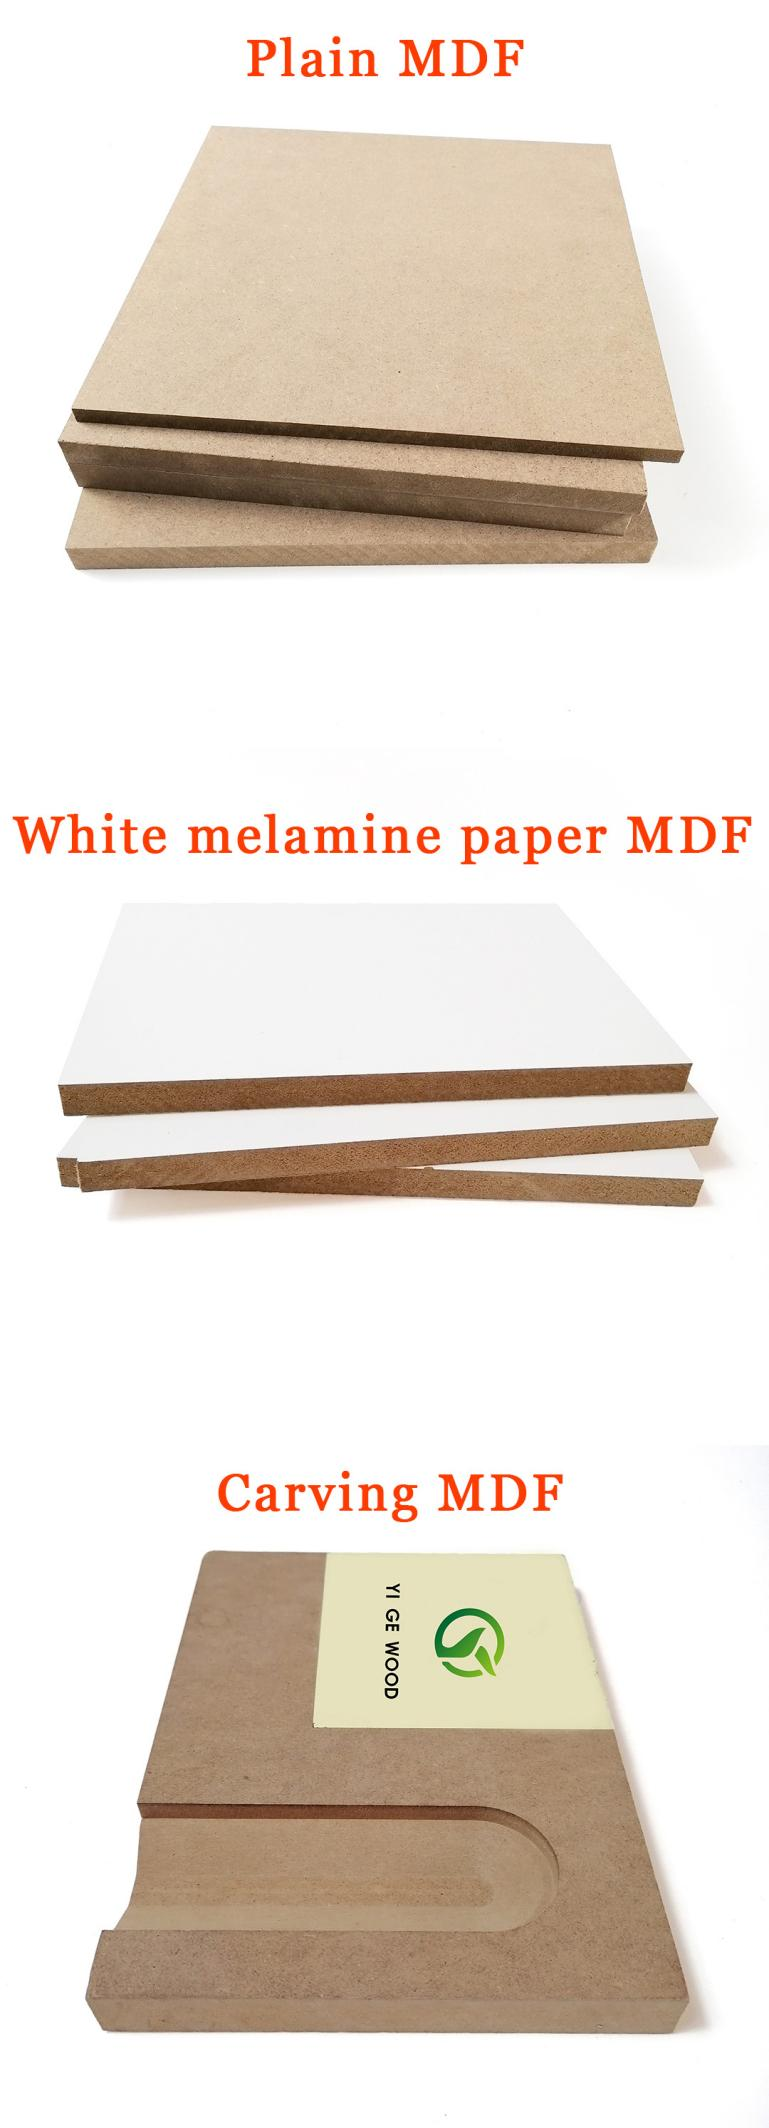 MDF is valued for its defect-free composition and highly uniform density that allow it to (1)